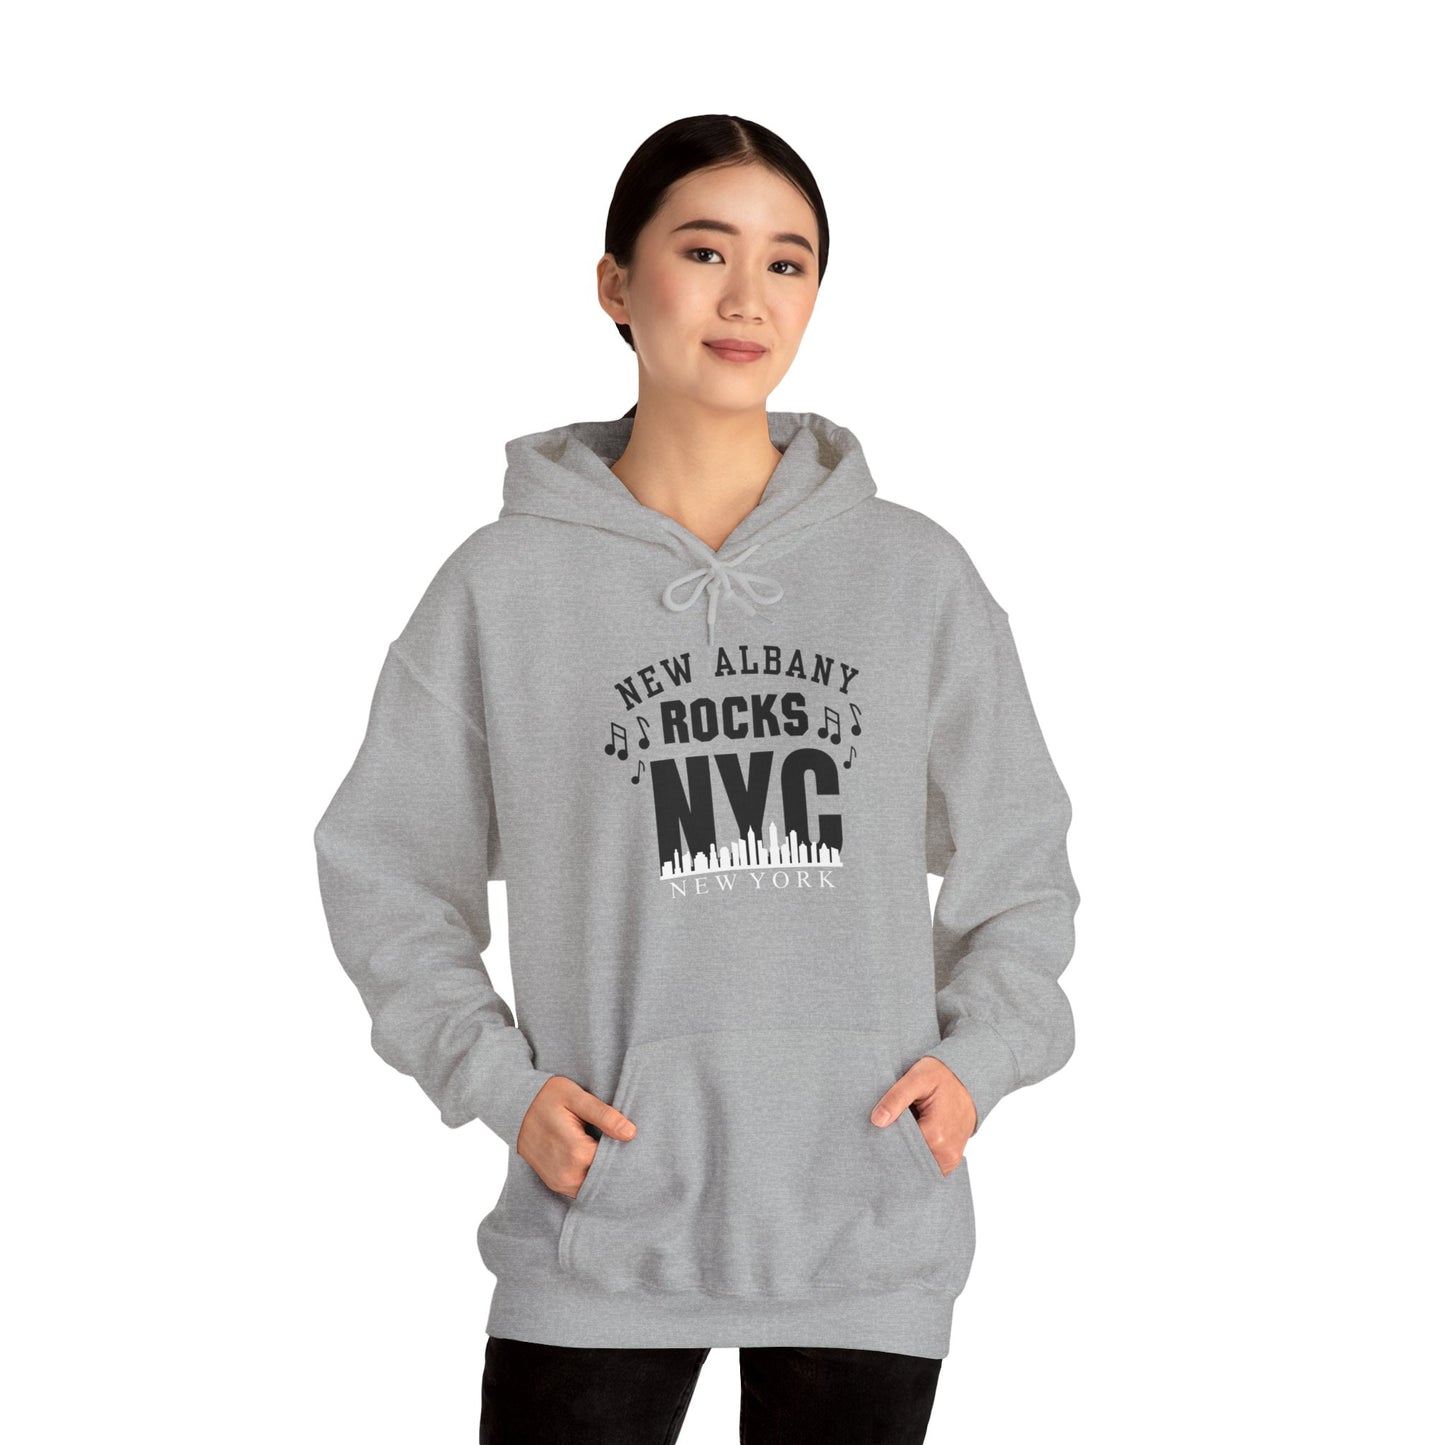 Adult Unisex Rock NYC Graphic Hoodie- New Albany Eagles